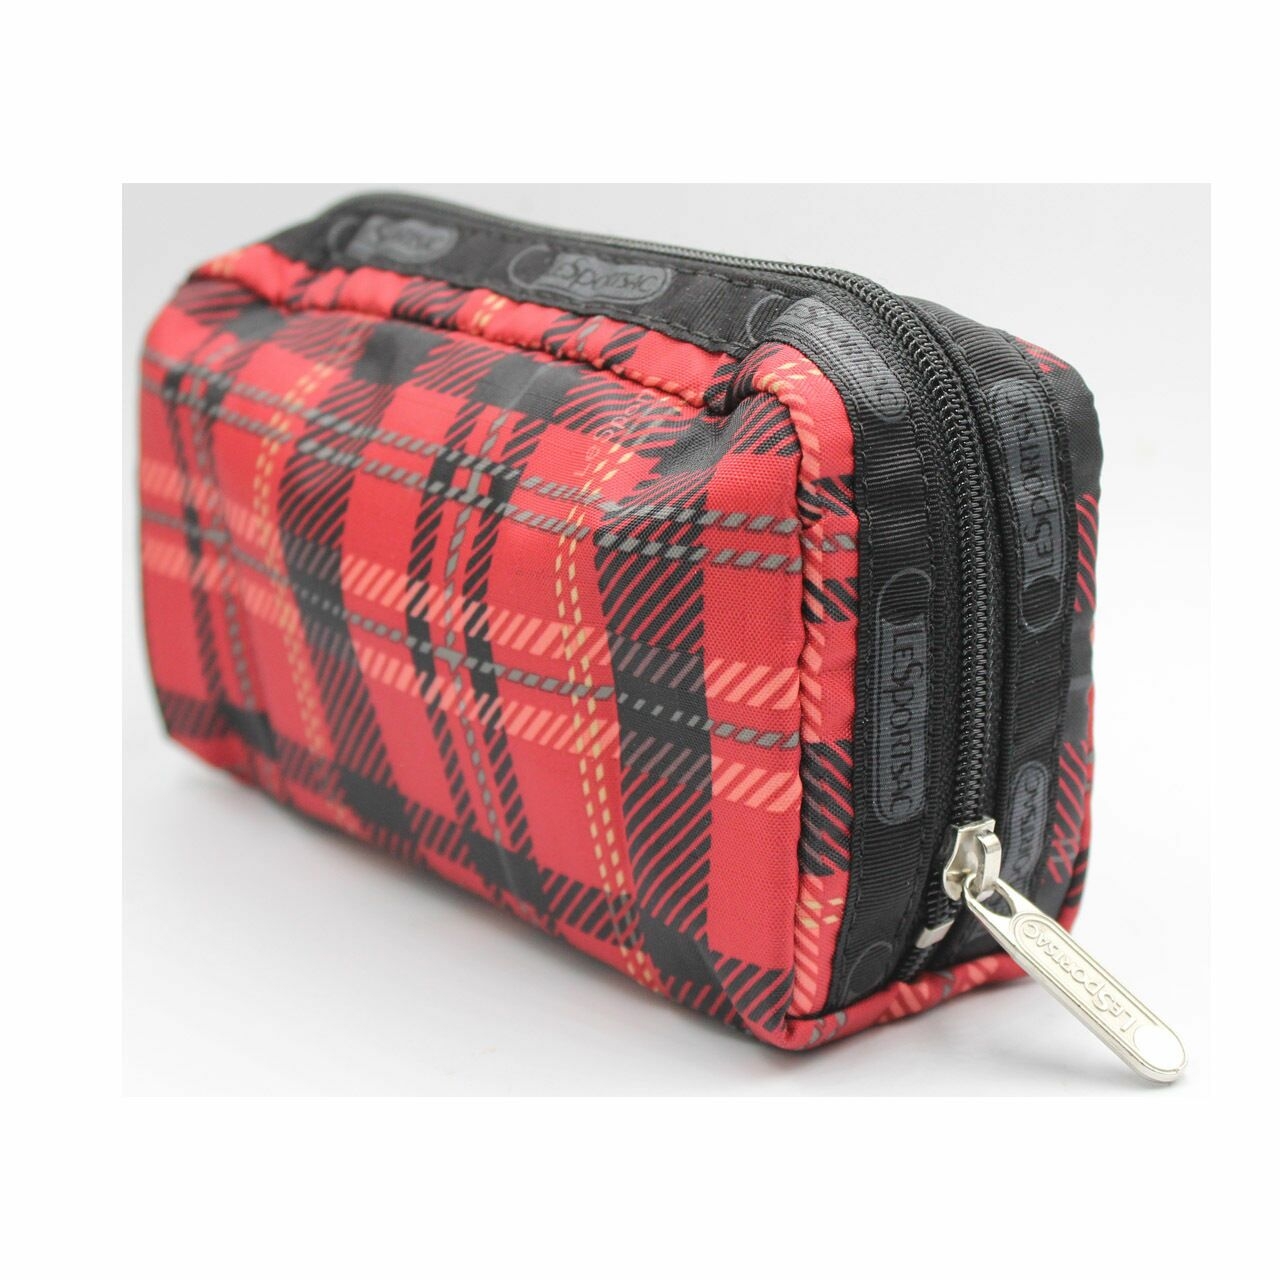 Le Sportsac Red & Black Pouch